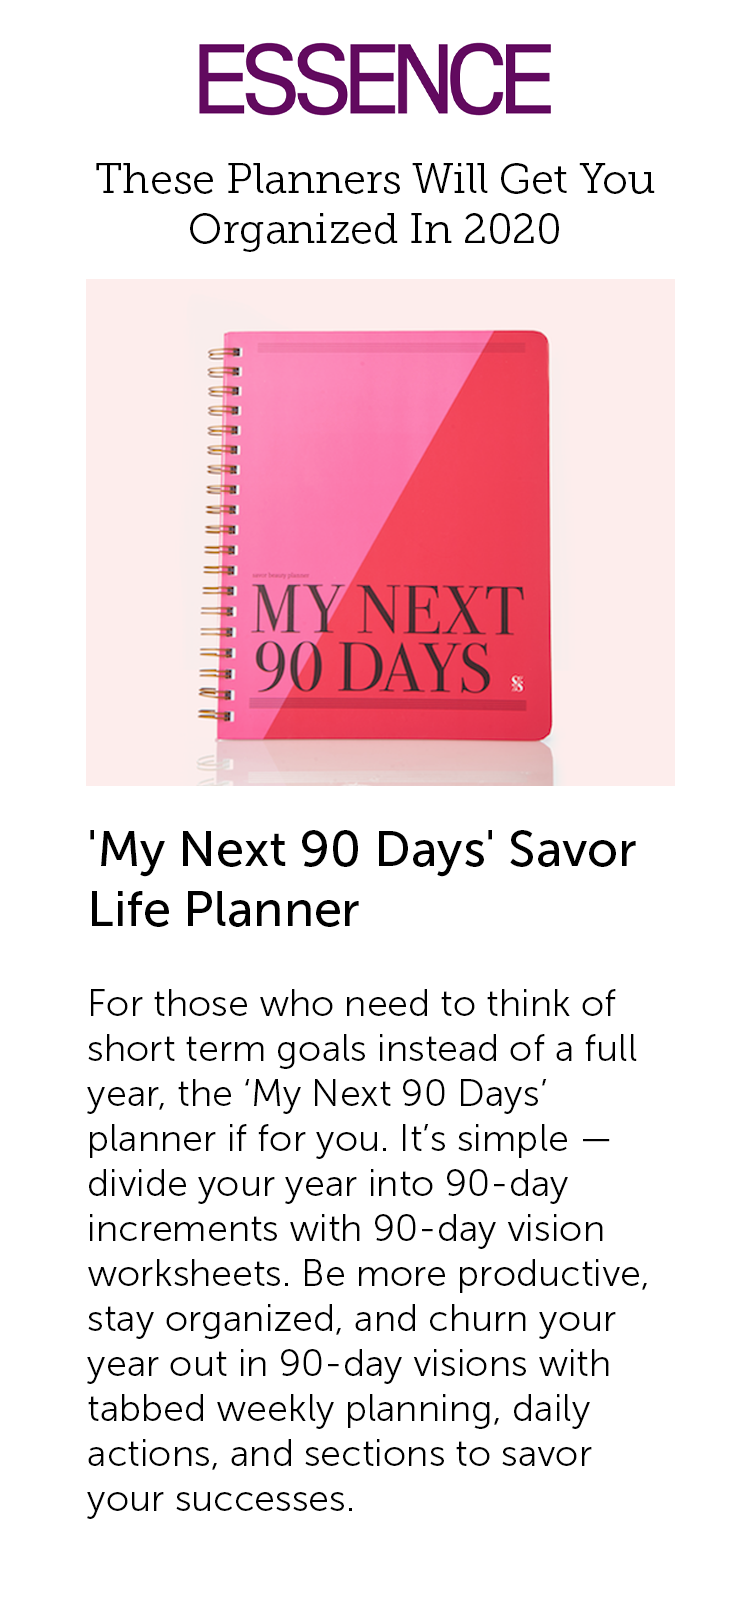 Essence: These Planners Will Get You Organized In 2020